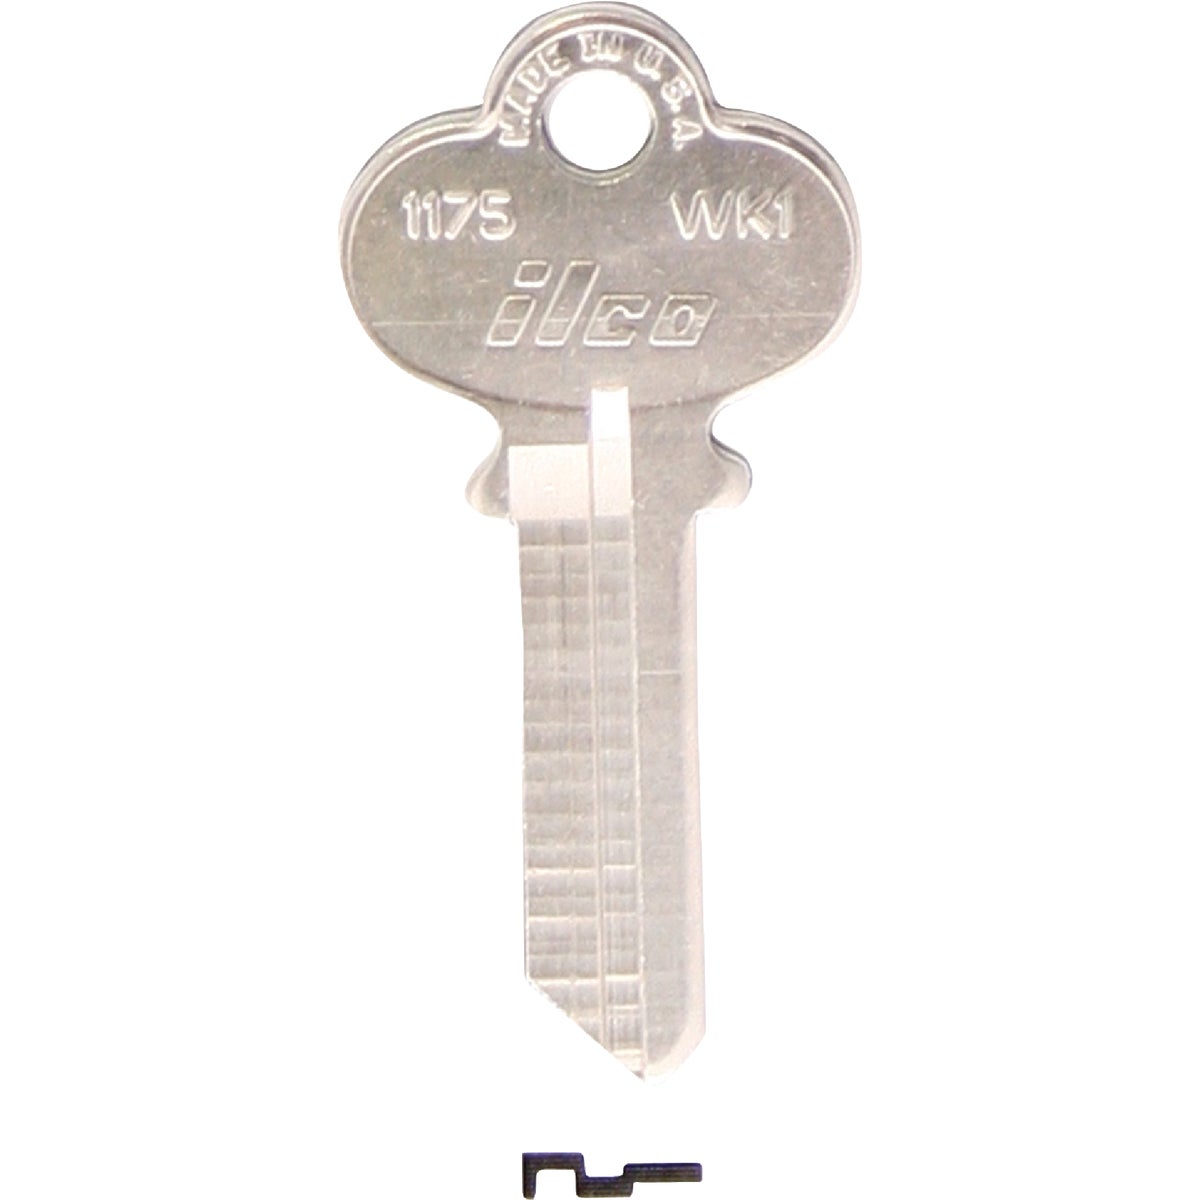 Item 235686, Nickel-plated key blank. When you order one, you will receive 10 keys.